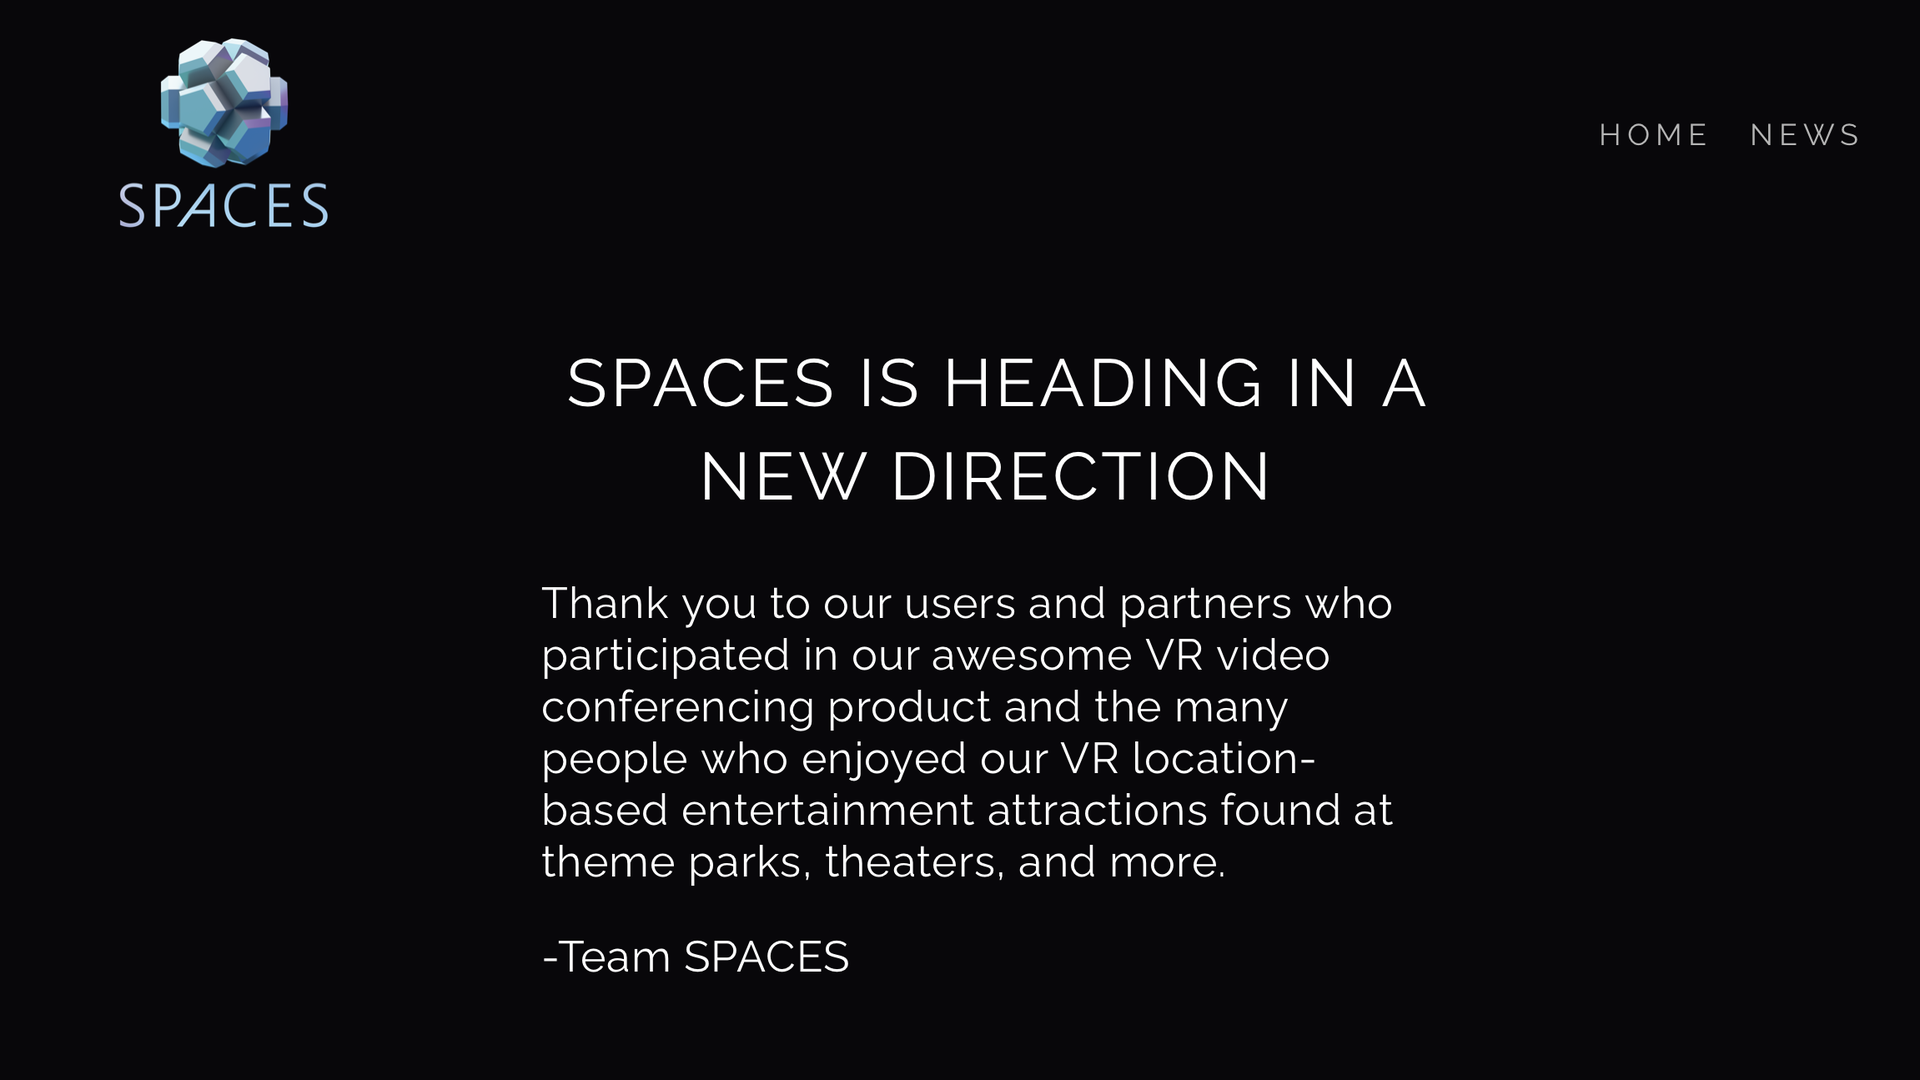 A screenshot of Spaces' web site confirming the company is "heading in a new direction"